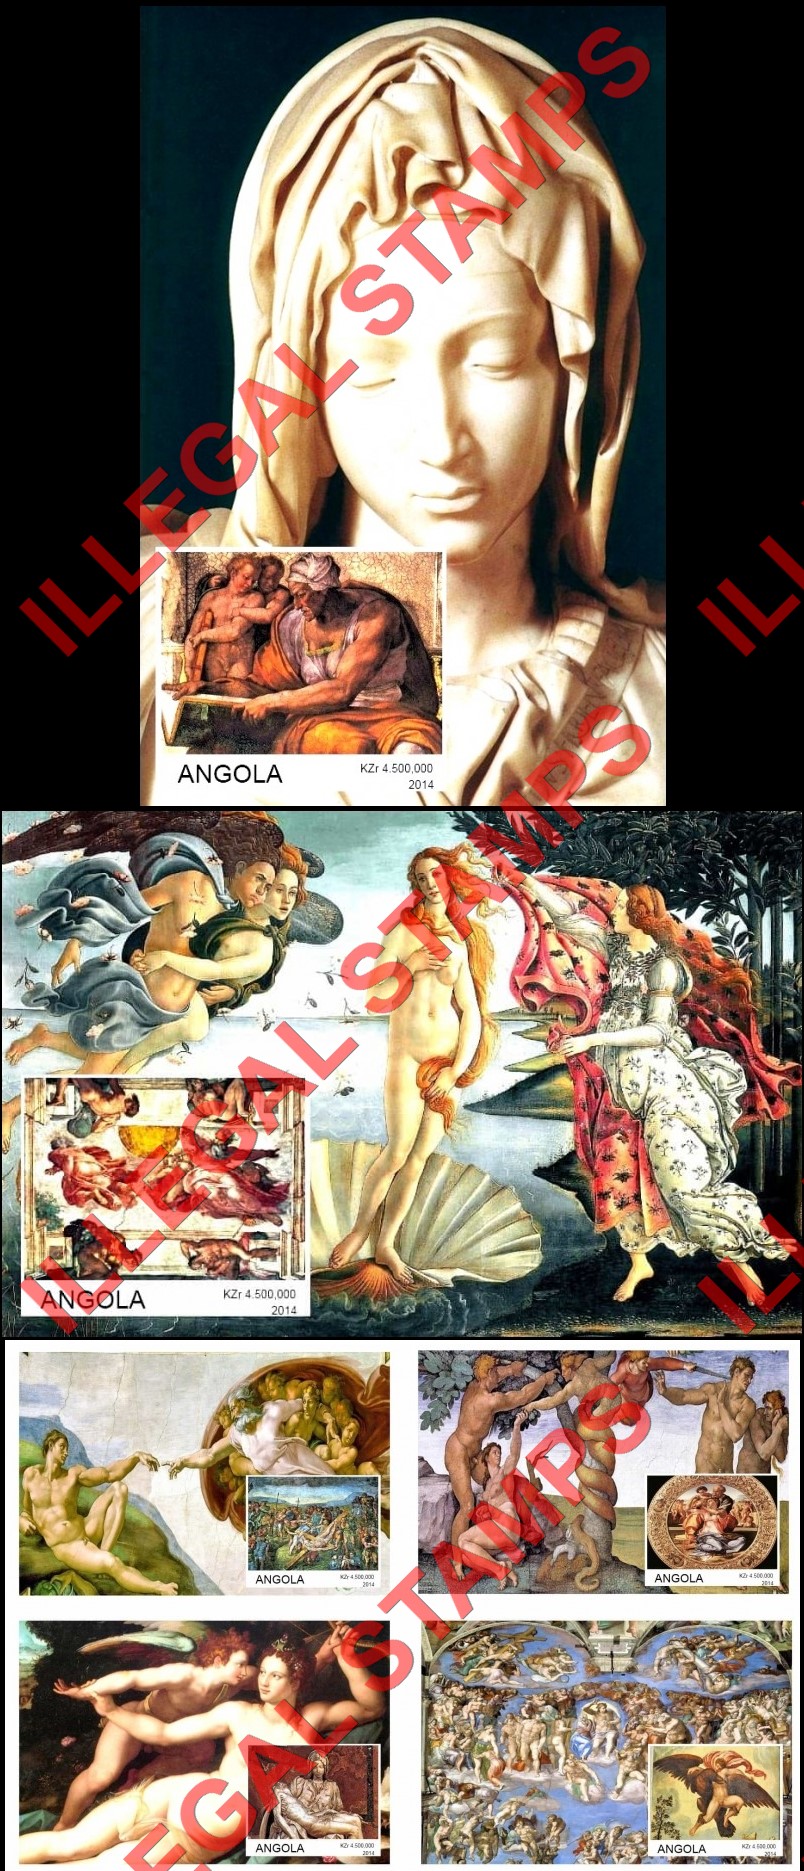 Angola 2014 Paintings by Michelangelo Buonarroti Illegal Stamp Souvenir Sheets of 1 (Part 1)